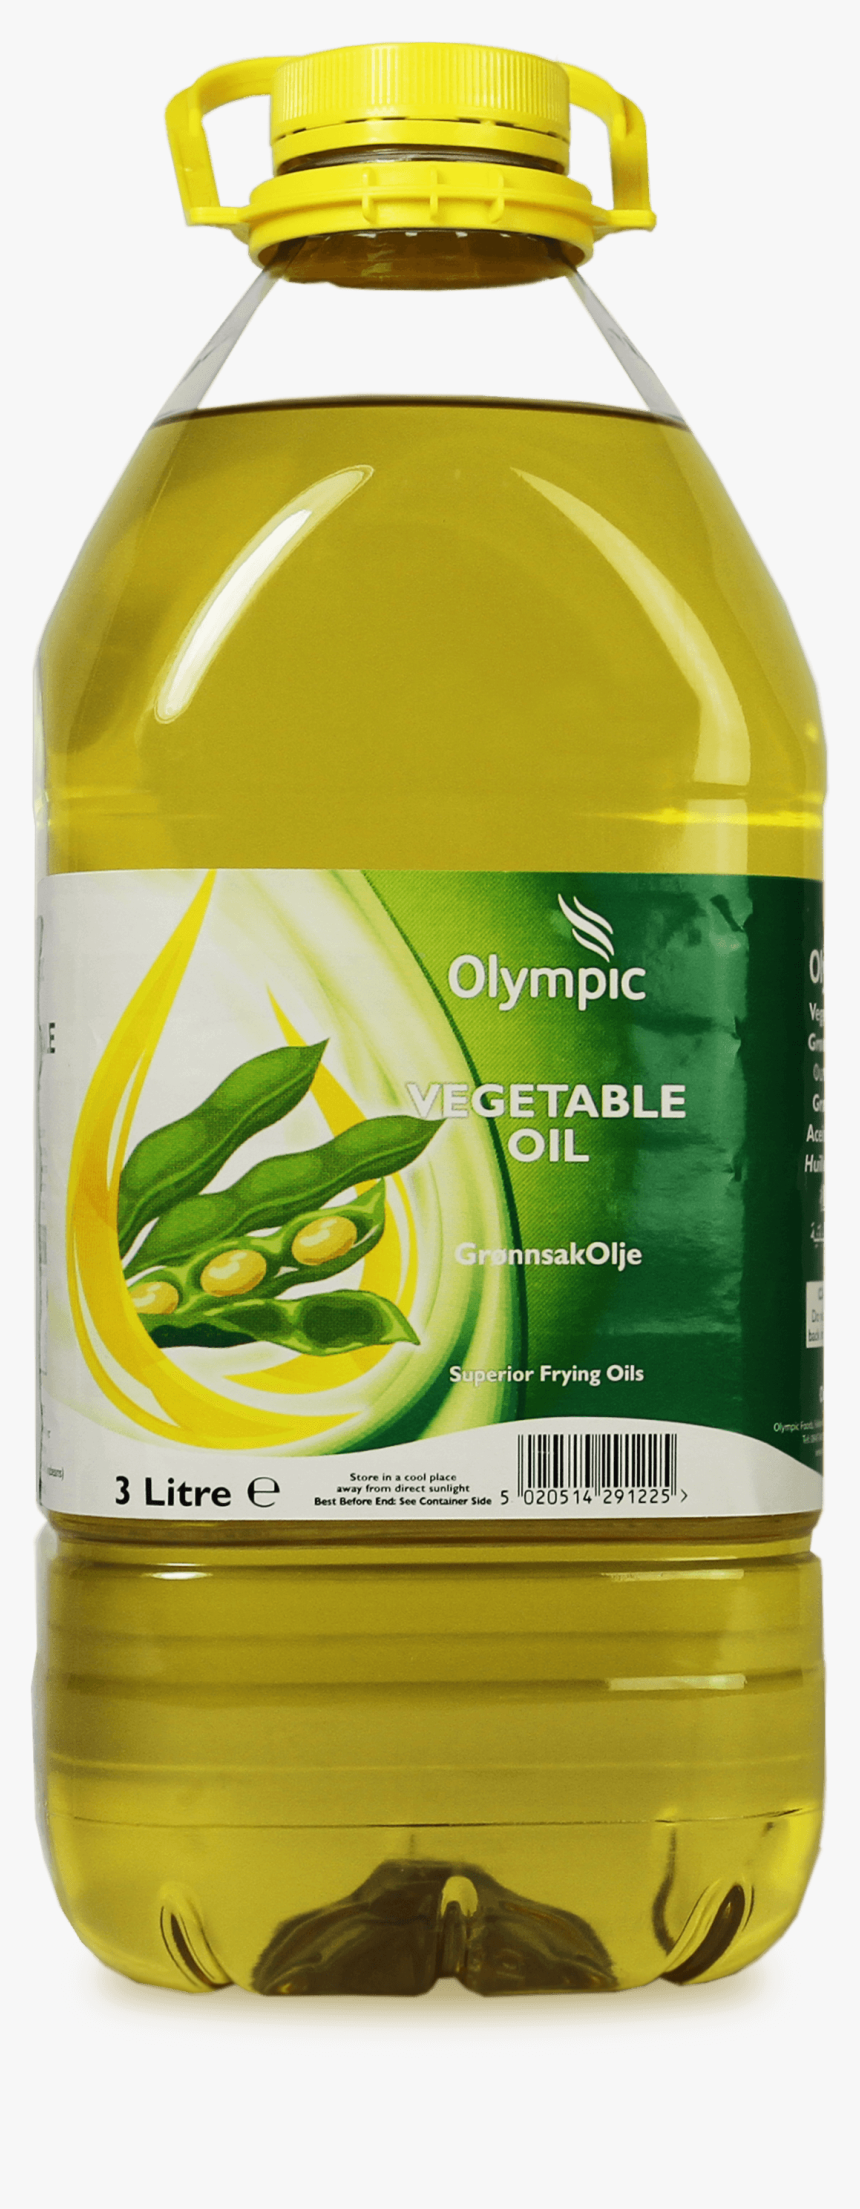 Olympic Vegetable Oil Litres Pet, HD Png Download, Free Download